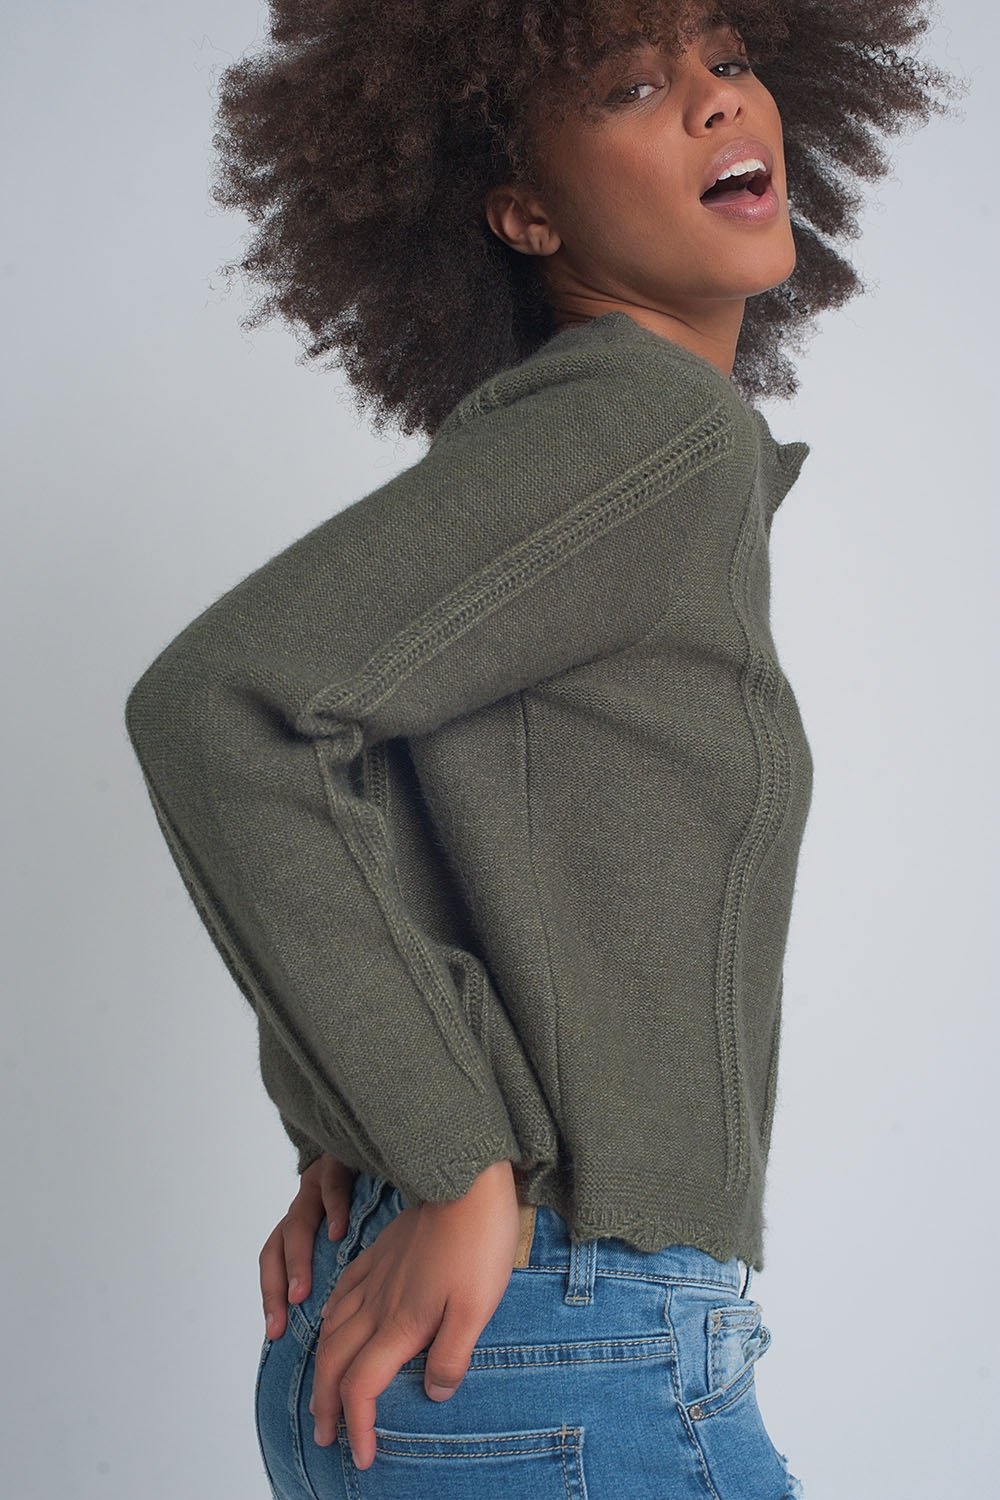 Vintage Inspired Button Front Crop 90s Cardi in Khaki